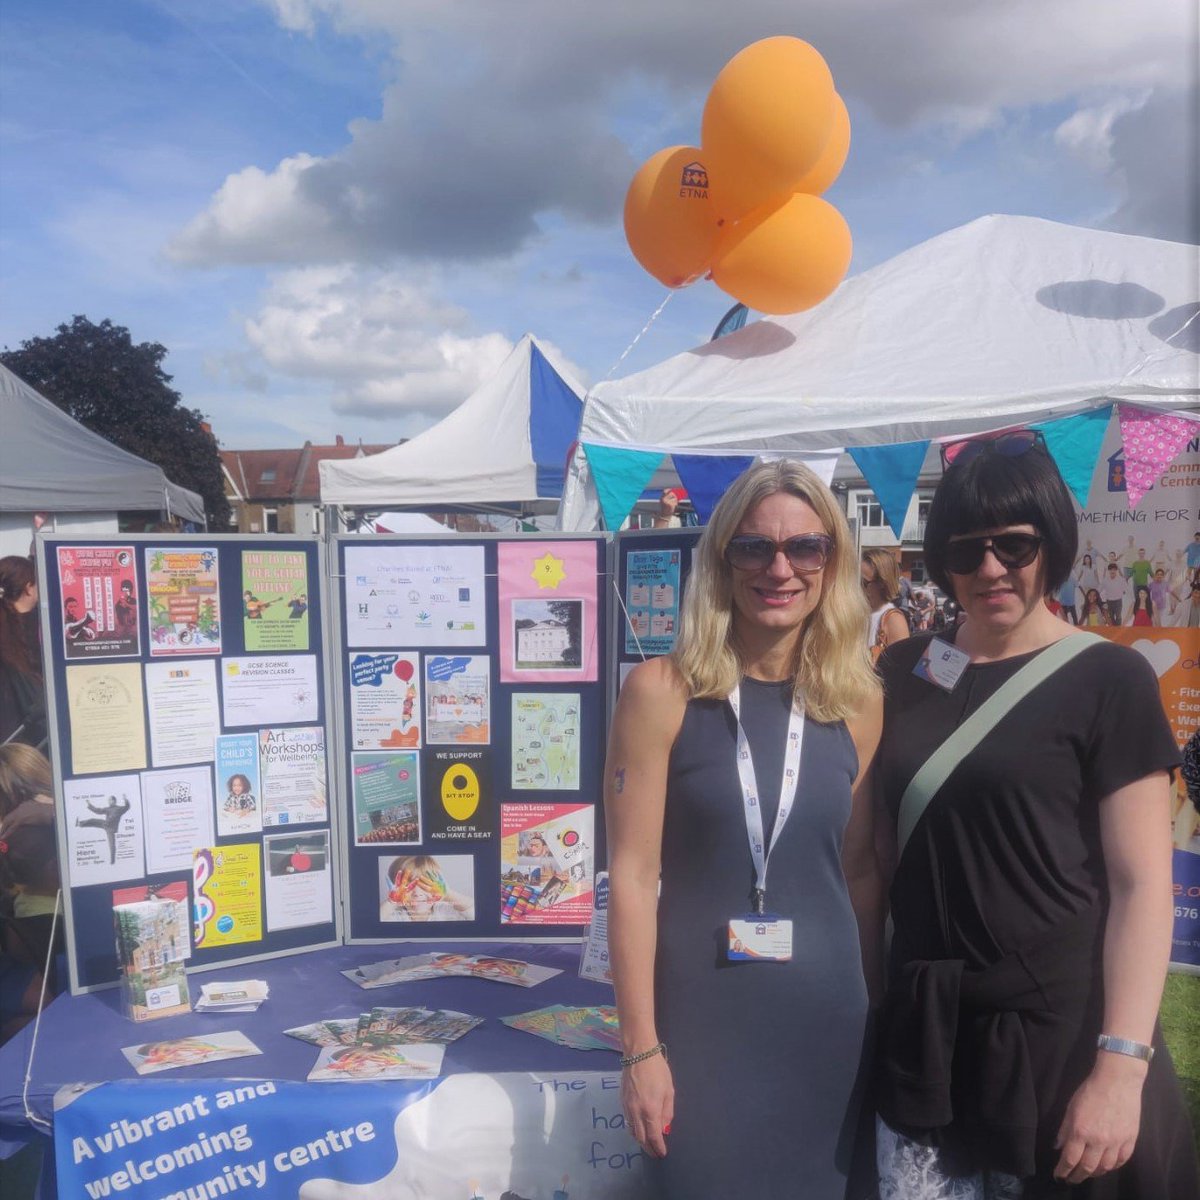 We had a great time at the @stmargaretsfair on Saturday. Thank you everyone who stopped by. Remember to visit @ETNACentre soon!😀#TW1 #CommunityTogether